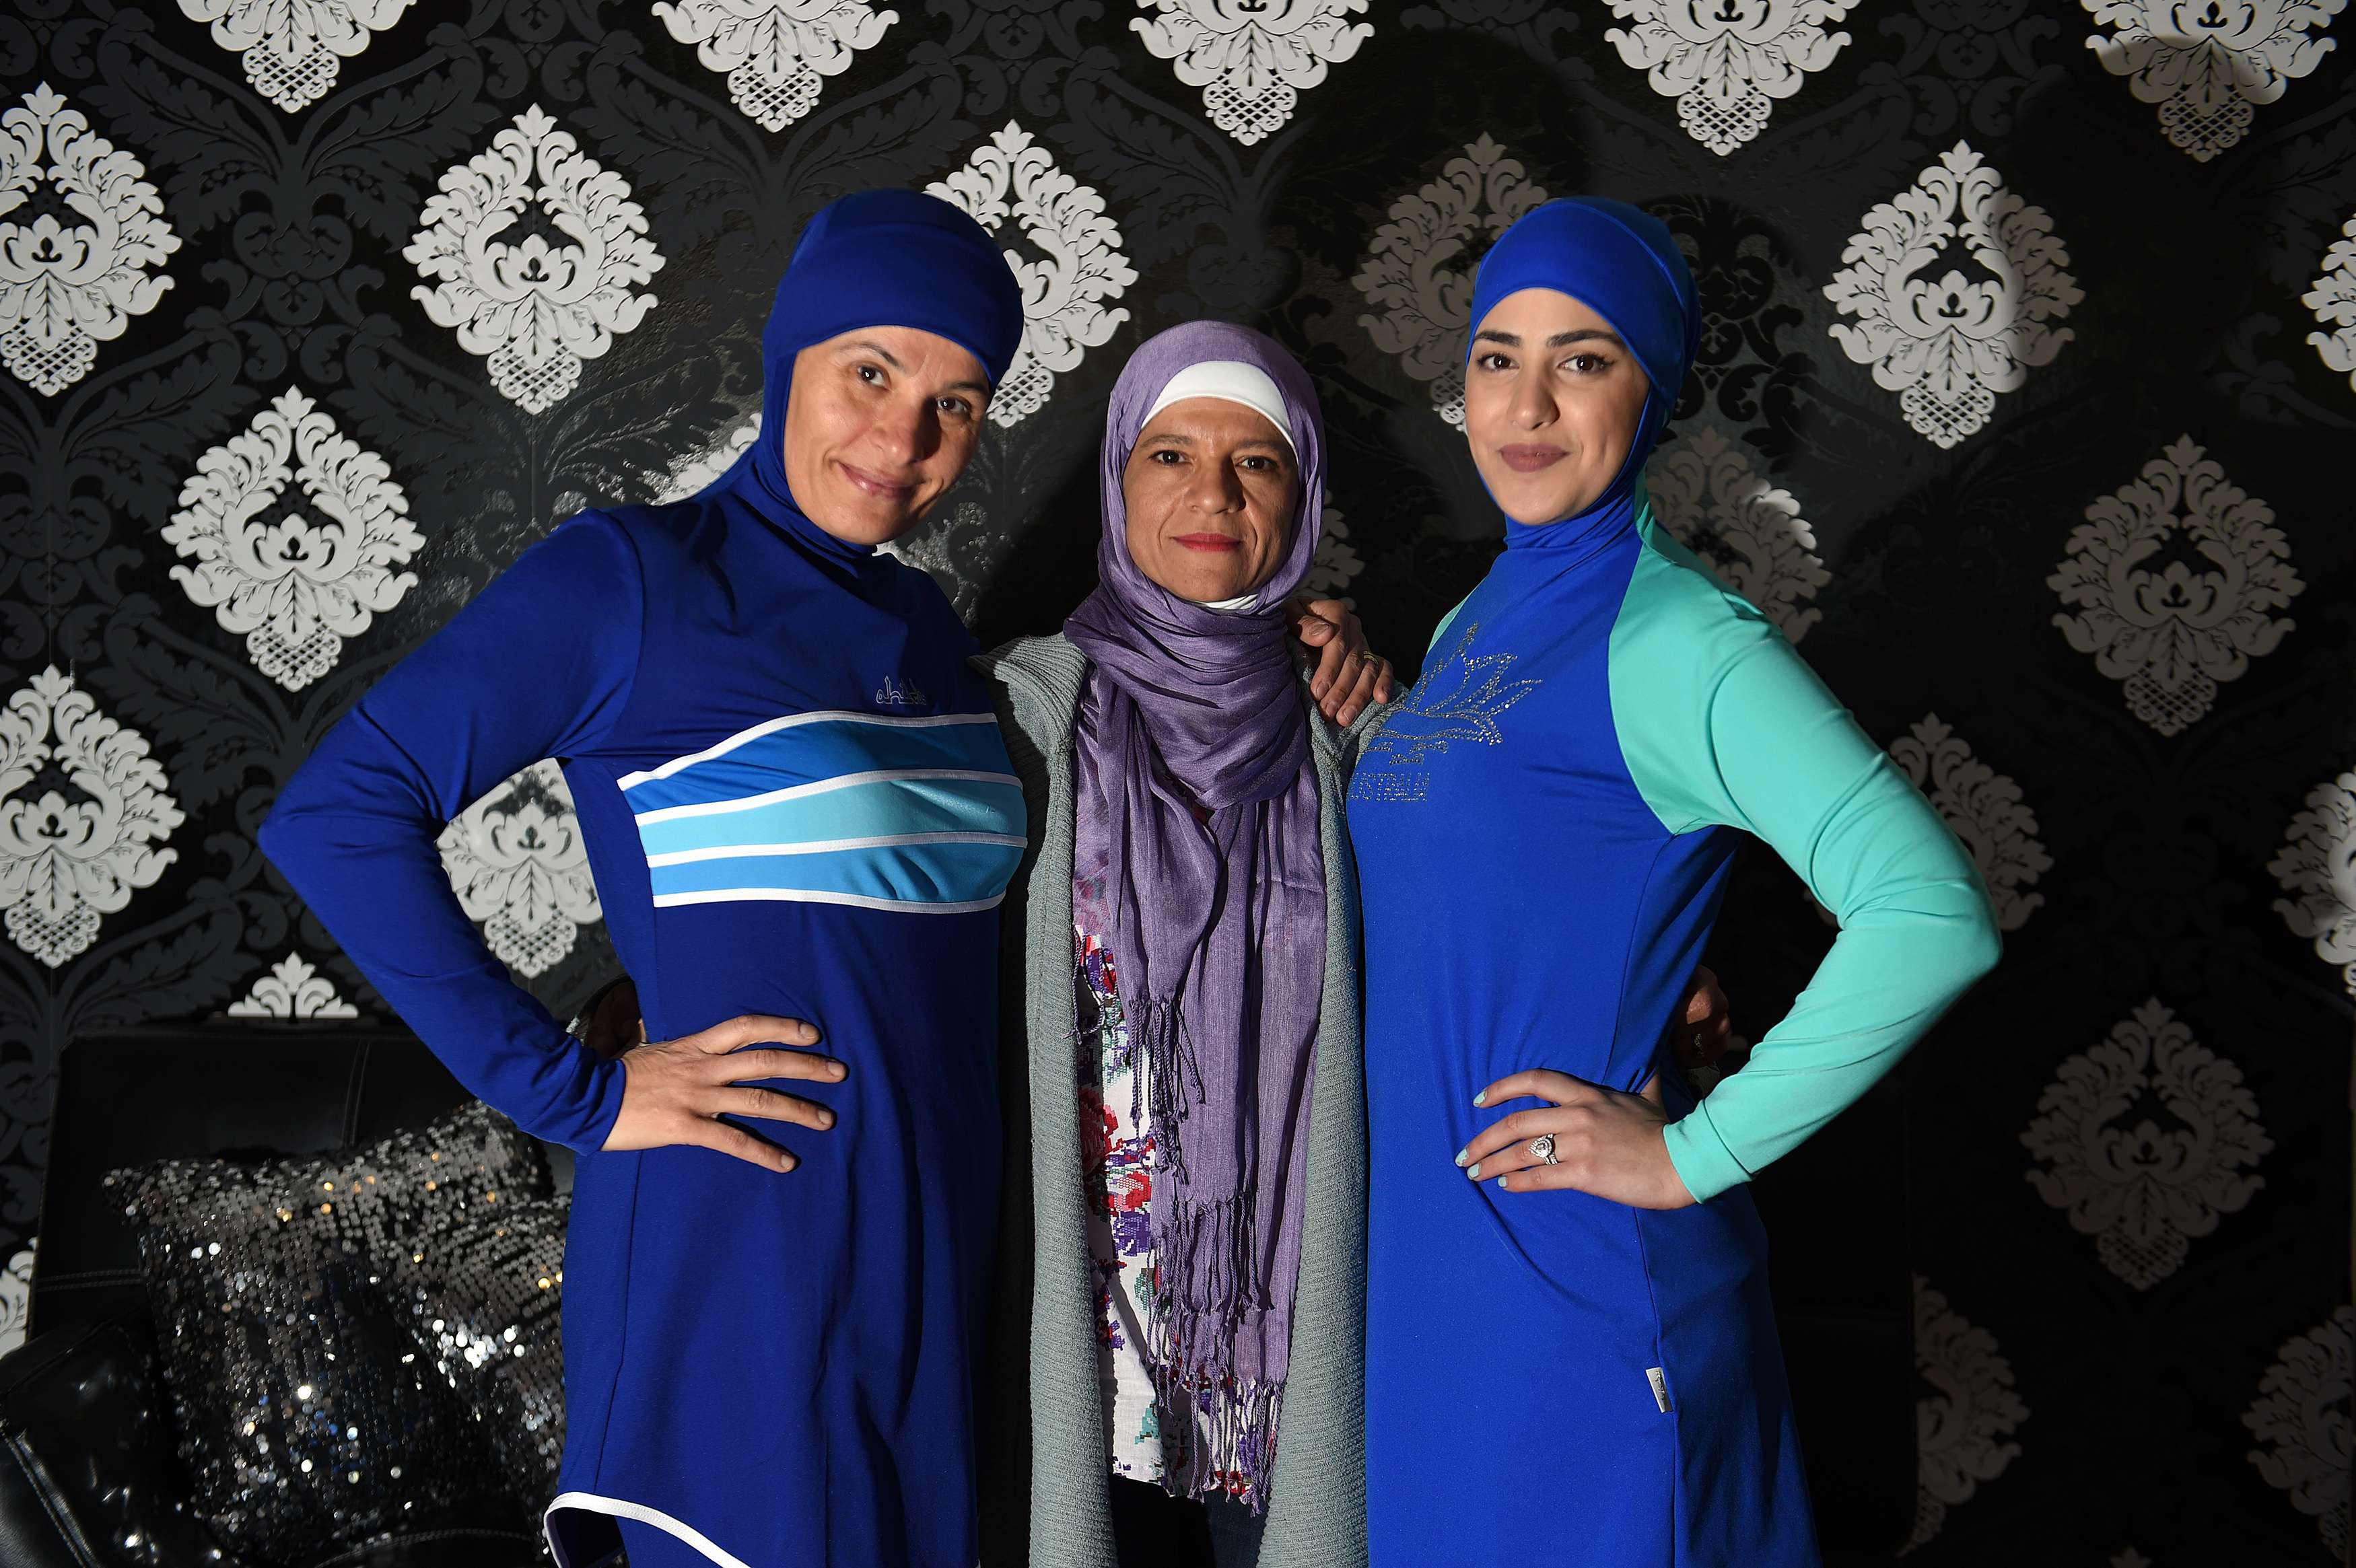 Models clad in burkini swimsuits pose with Australian-Lebanese designer Aheda Zanetti in western. Photo: AFP